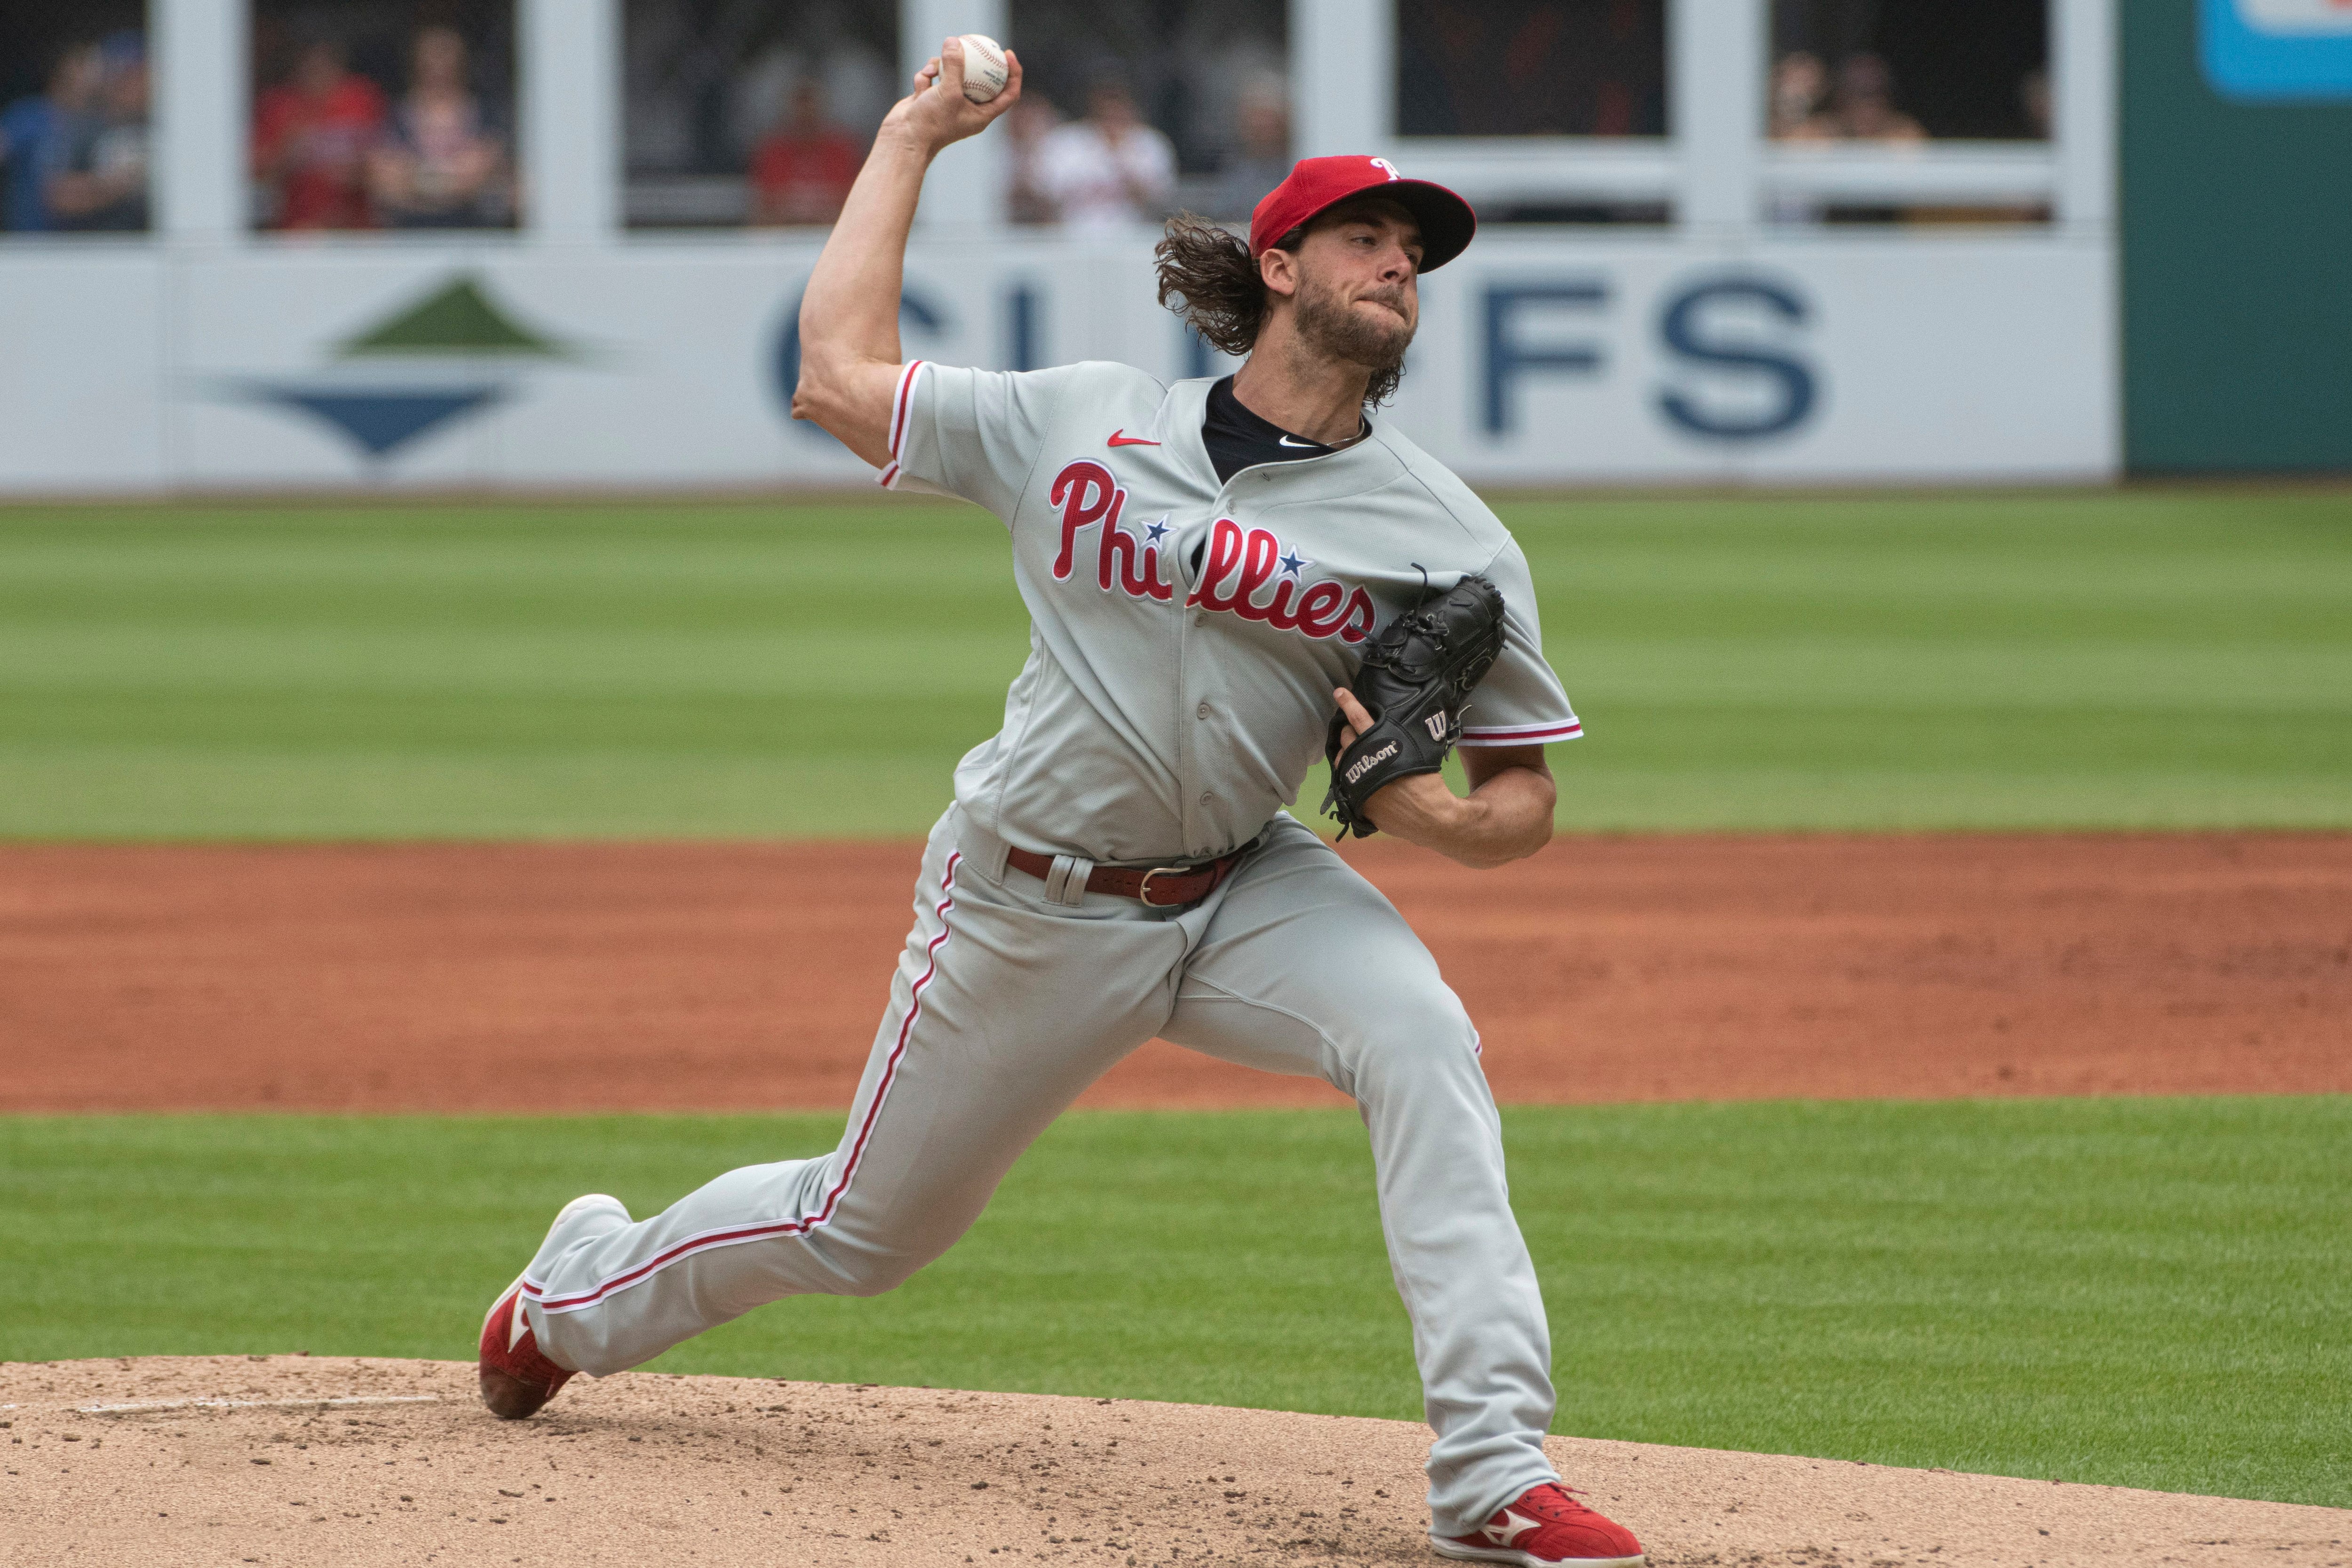 With feet and glove, Bryson Stott makes a difference for Phillies in Game 5